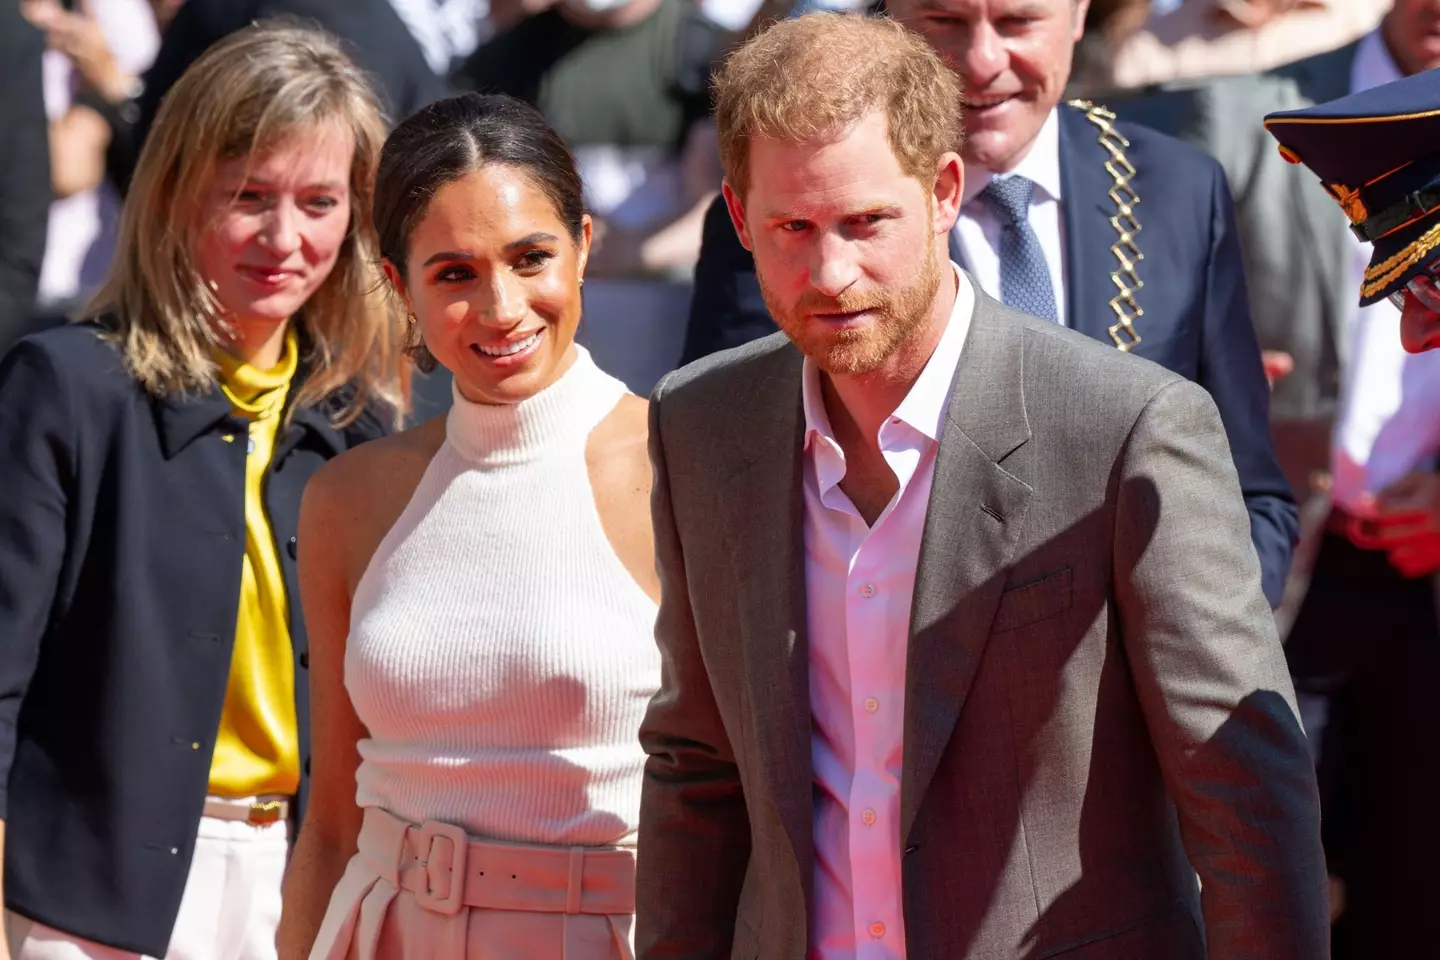 Prince Harry and Meghan Markle had been in Europe to visit charities they work with before they made the last minute return to the UK.